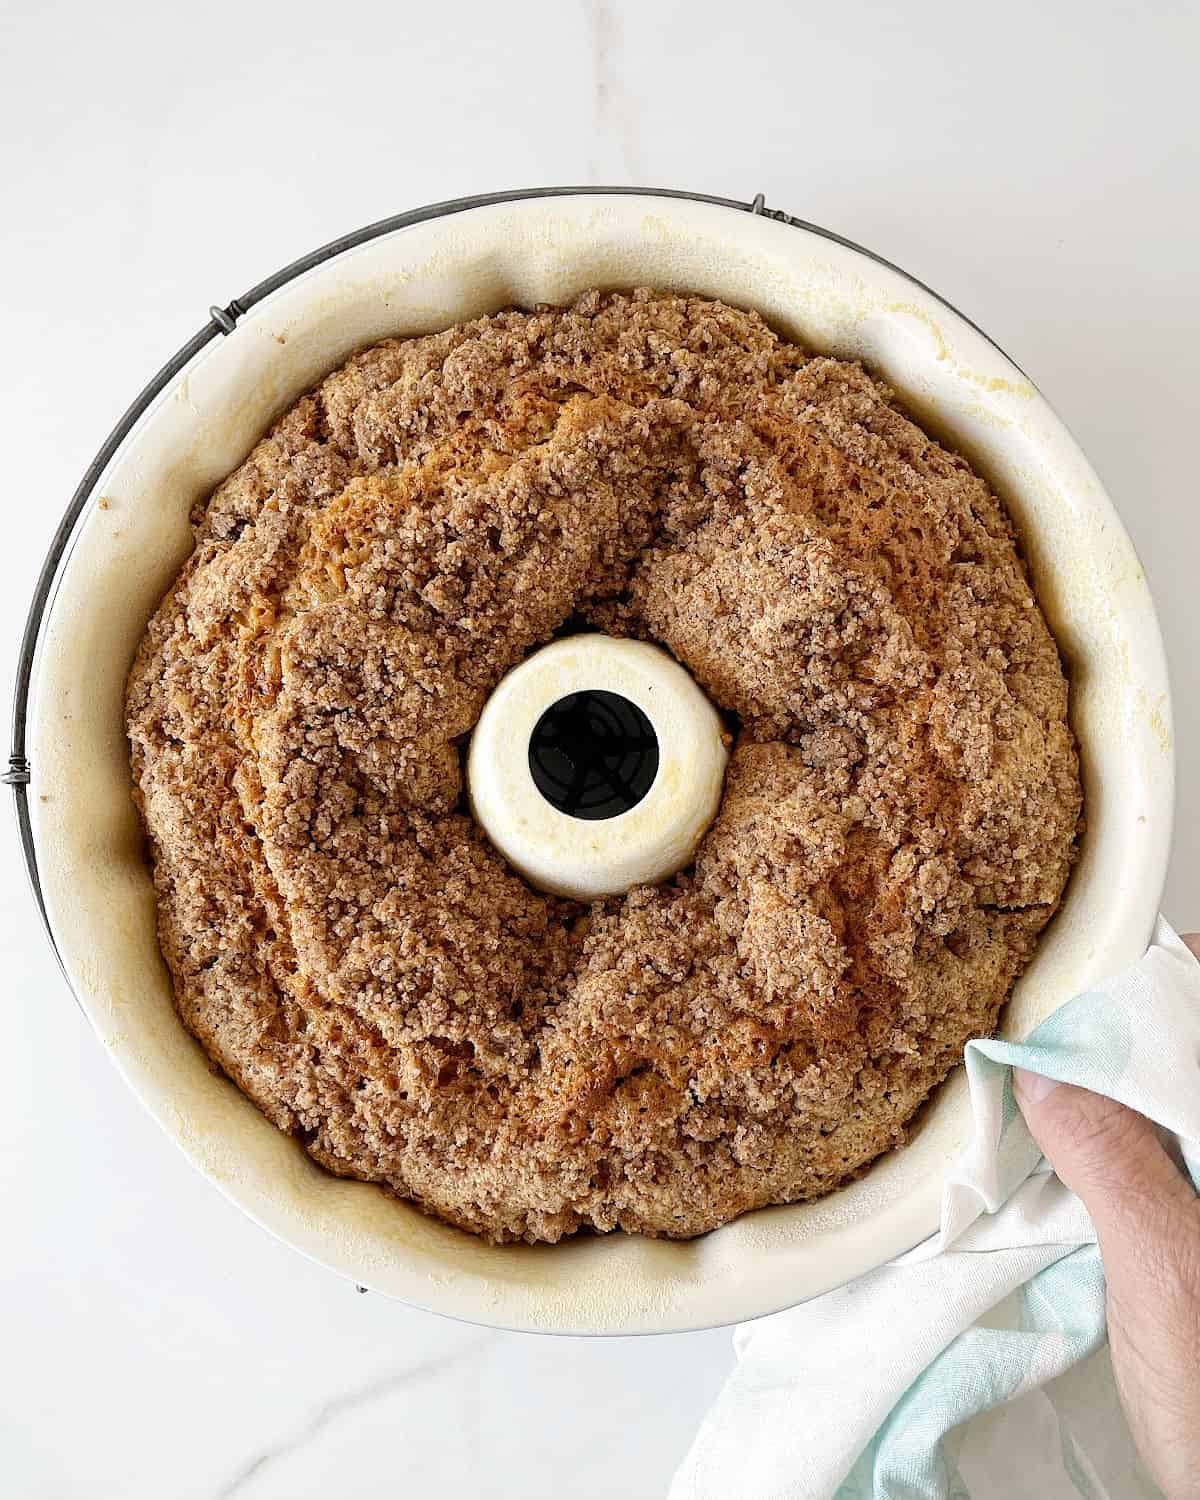 Holding a streusel topped bundt cake in the pan. White marbled surface.